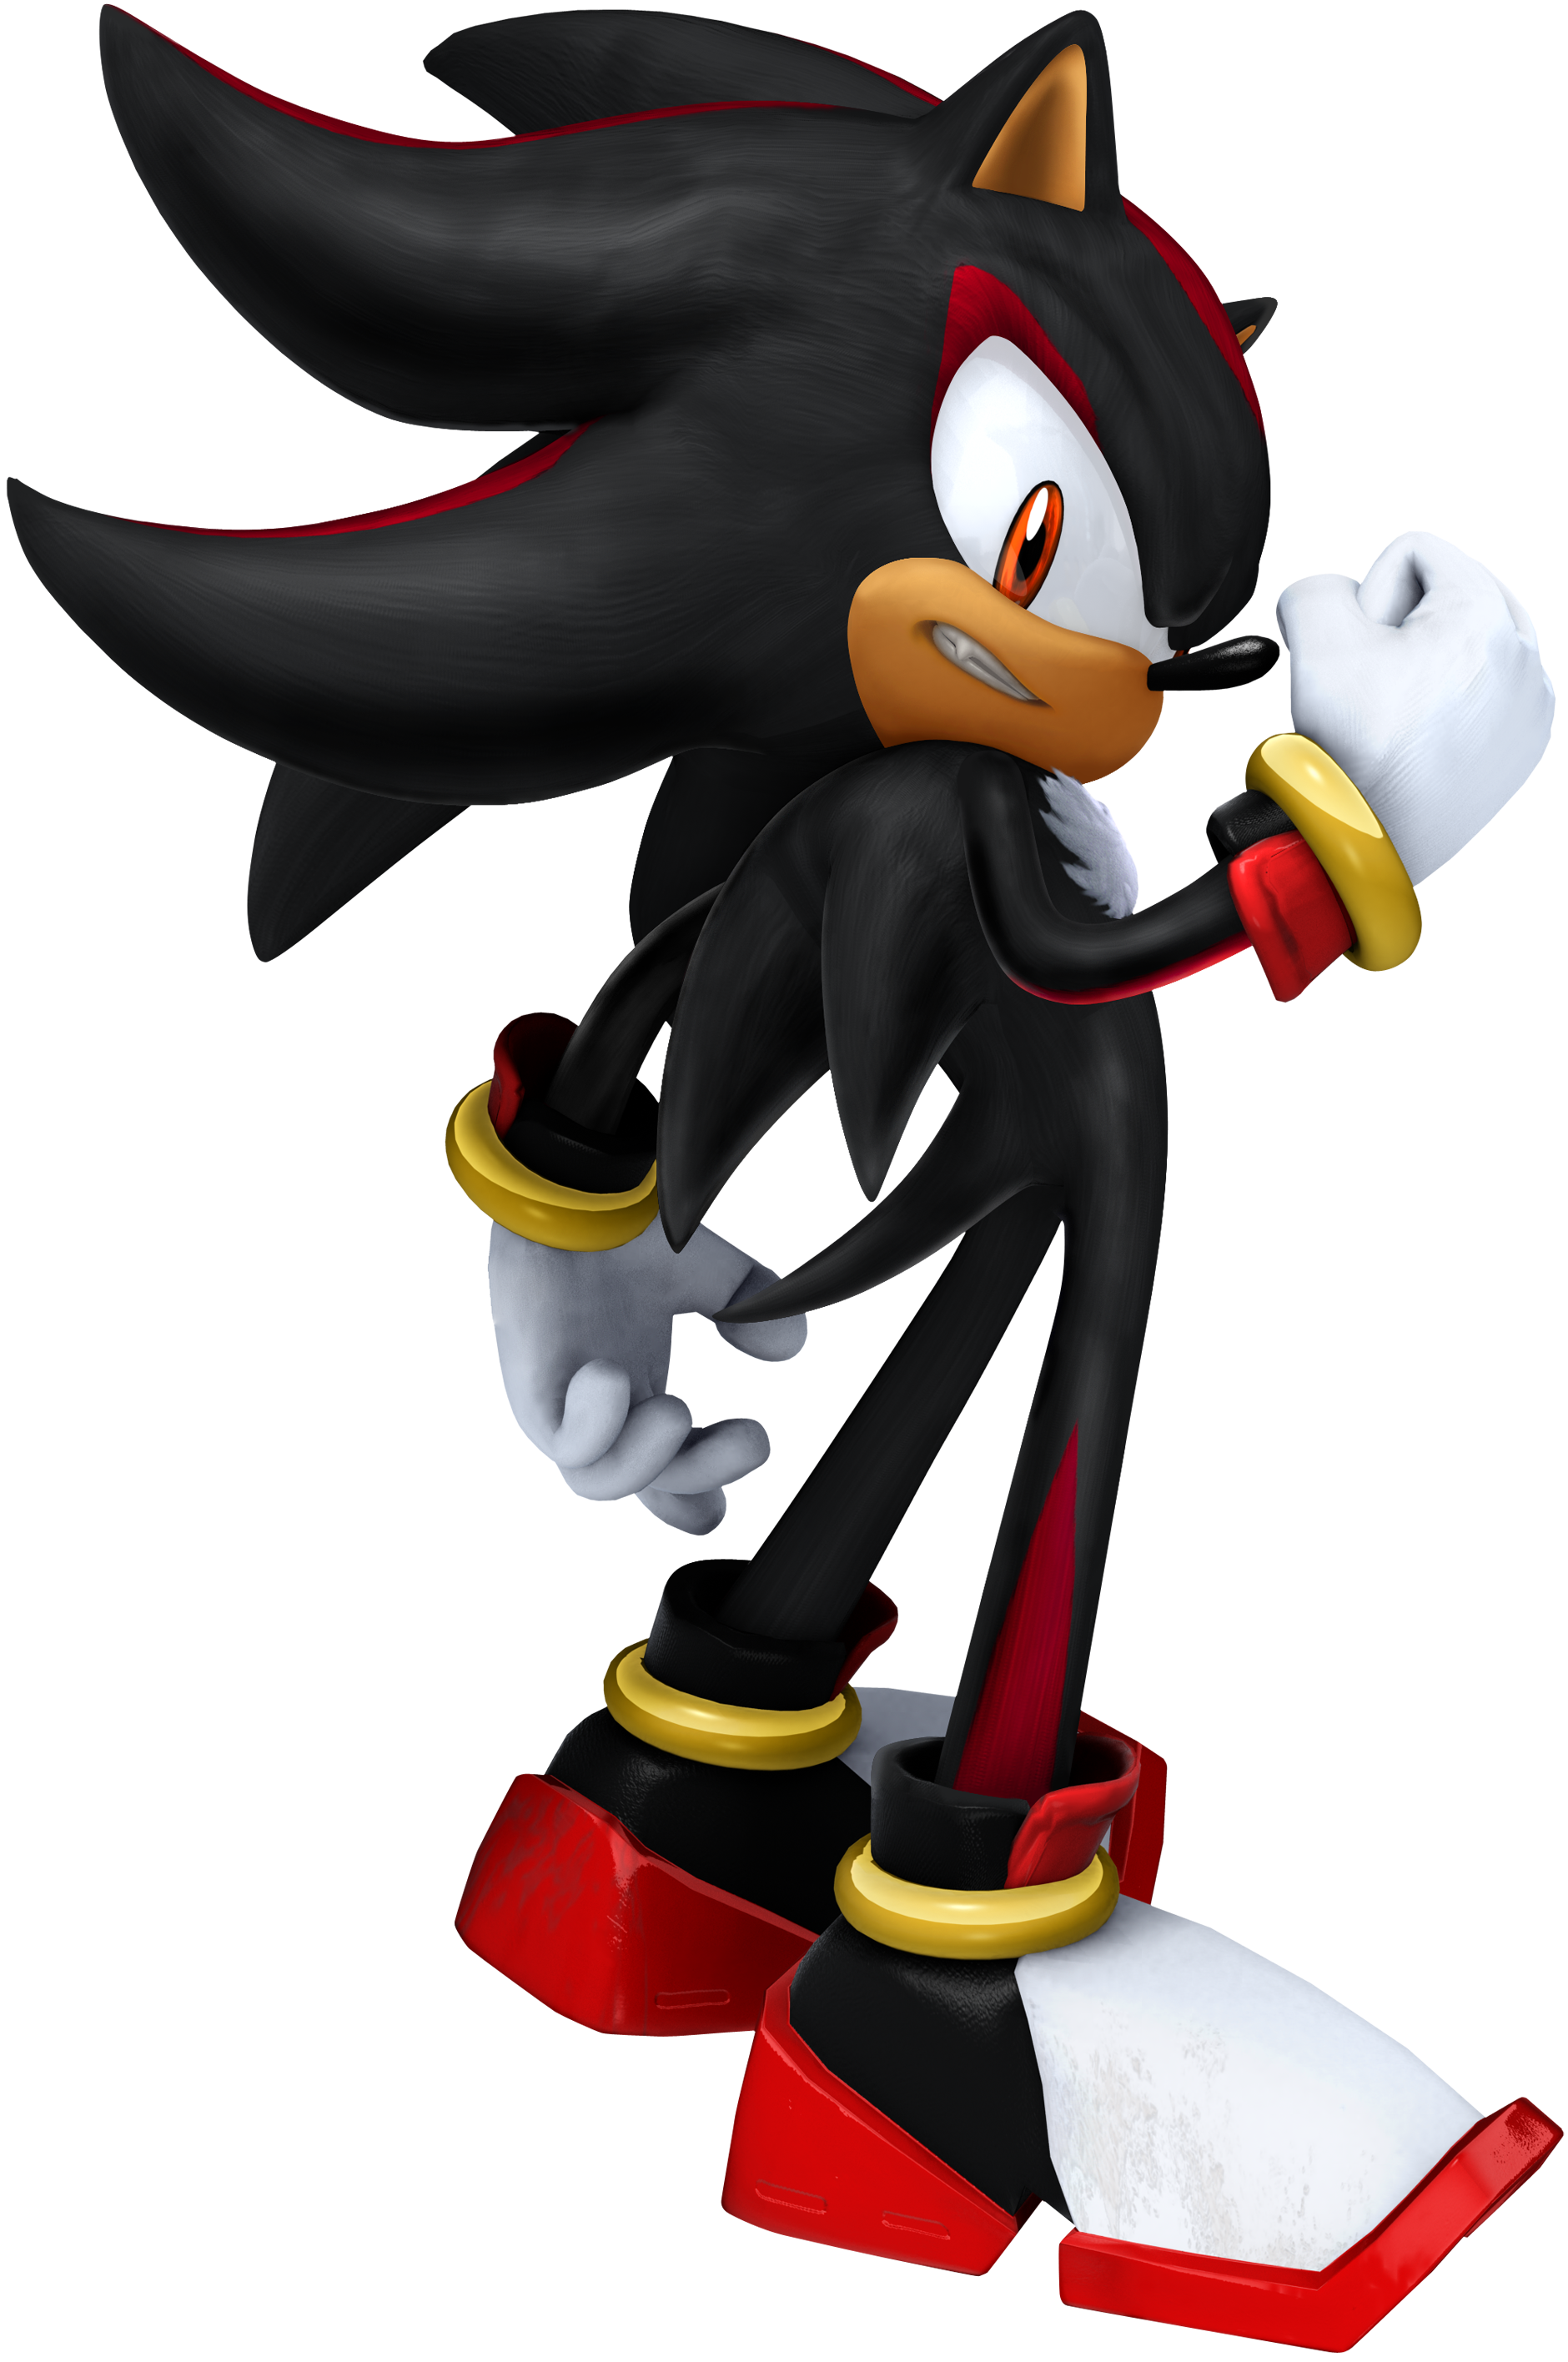 Shadow the Hedgehog was designed to appeal to the West – Destructoid